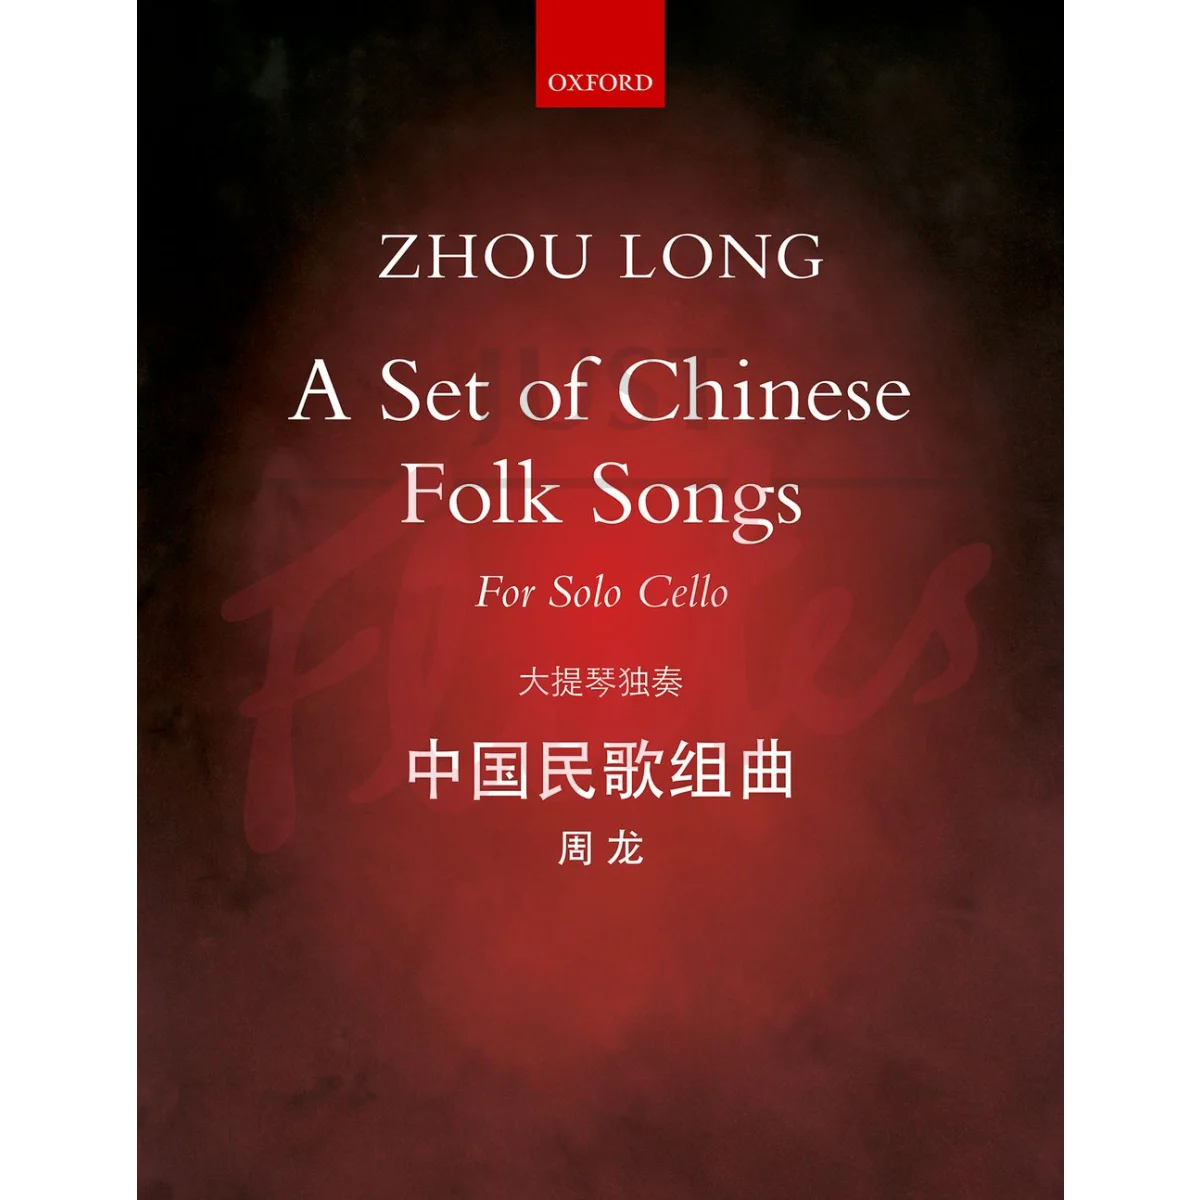 A Set of Chinese Folk Songs for Solo Cello